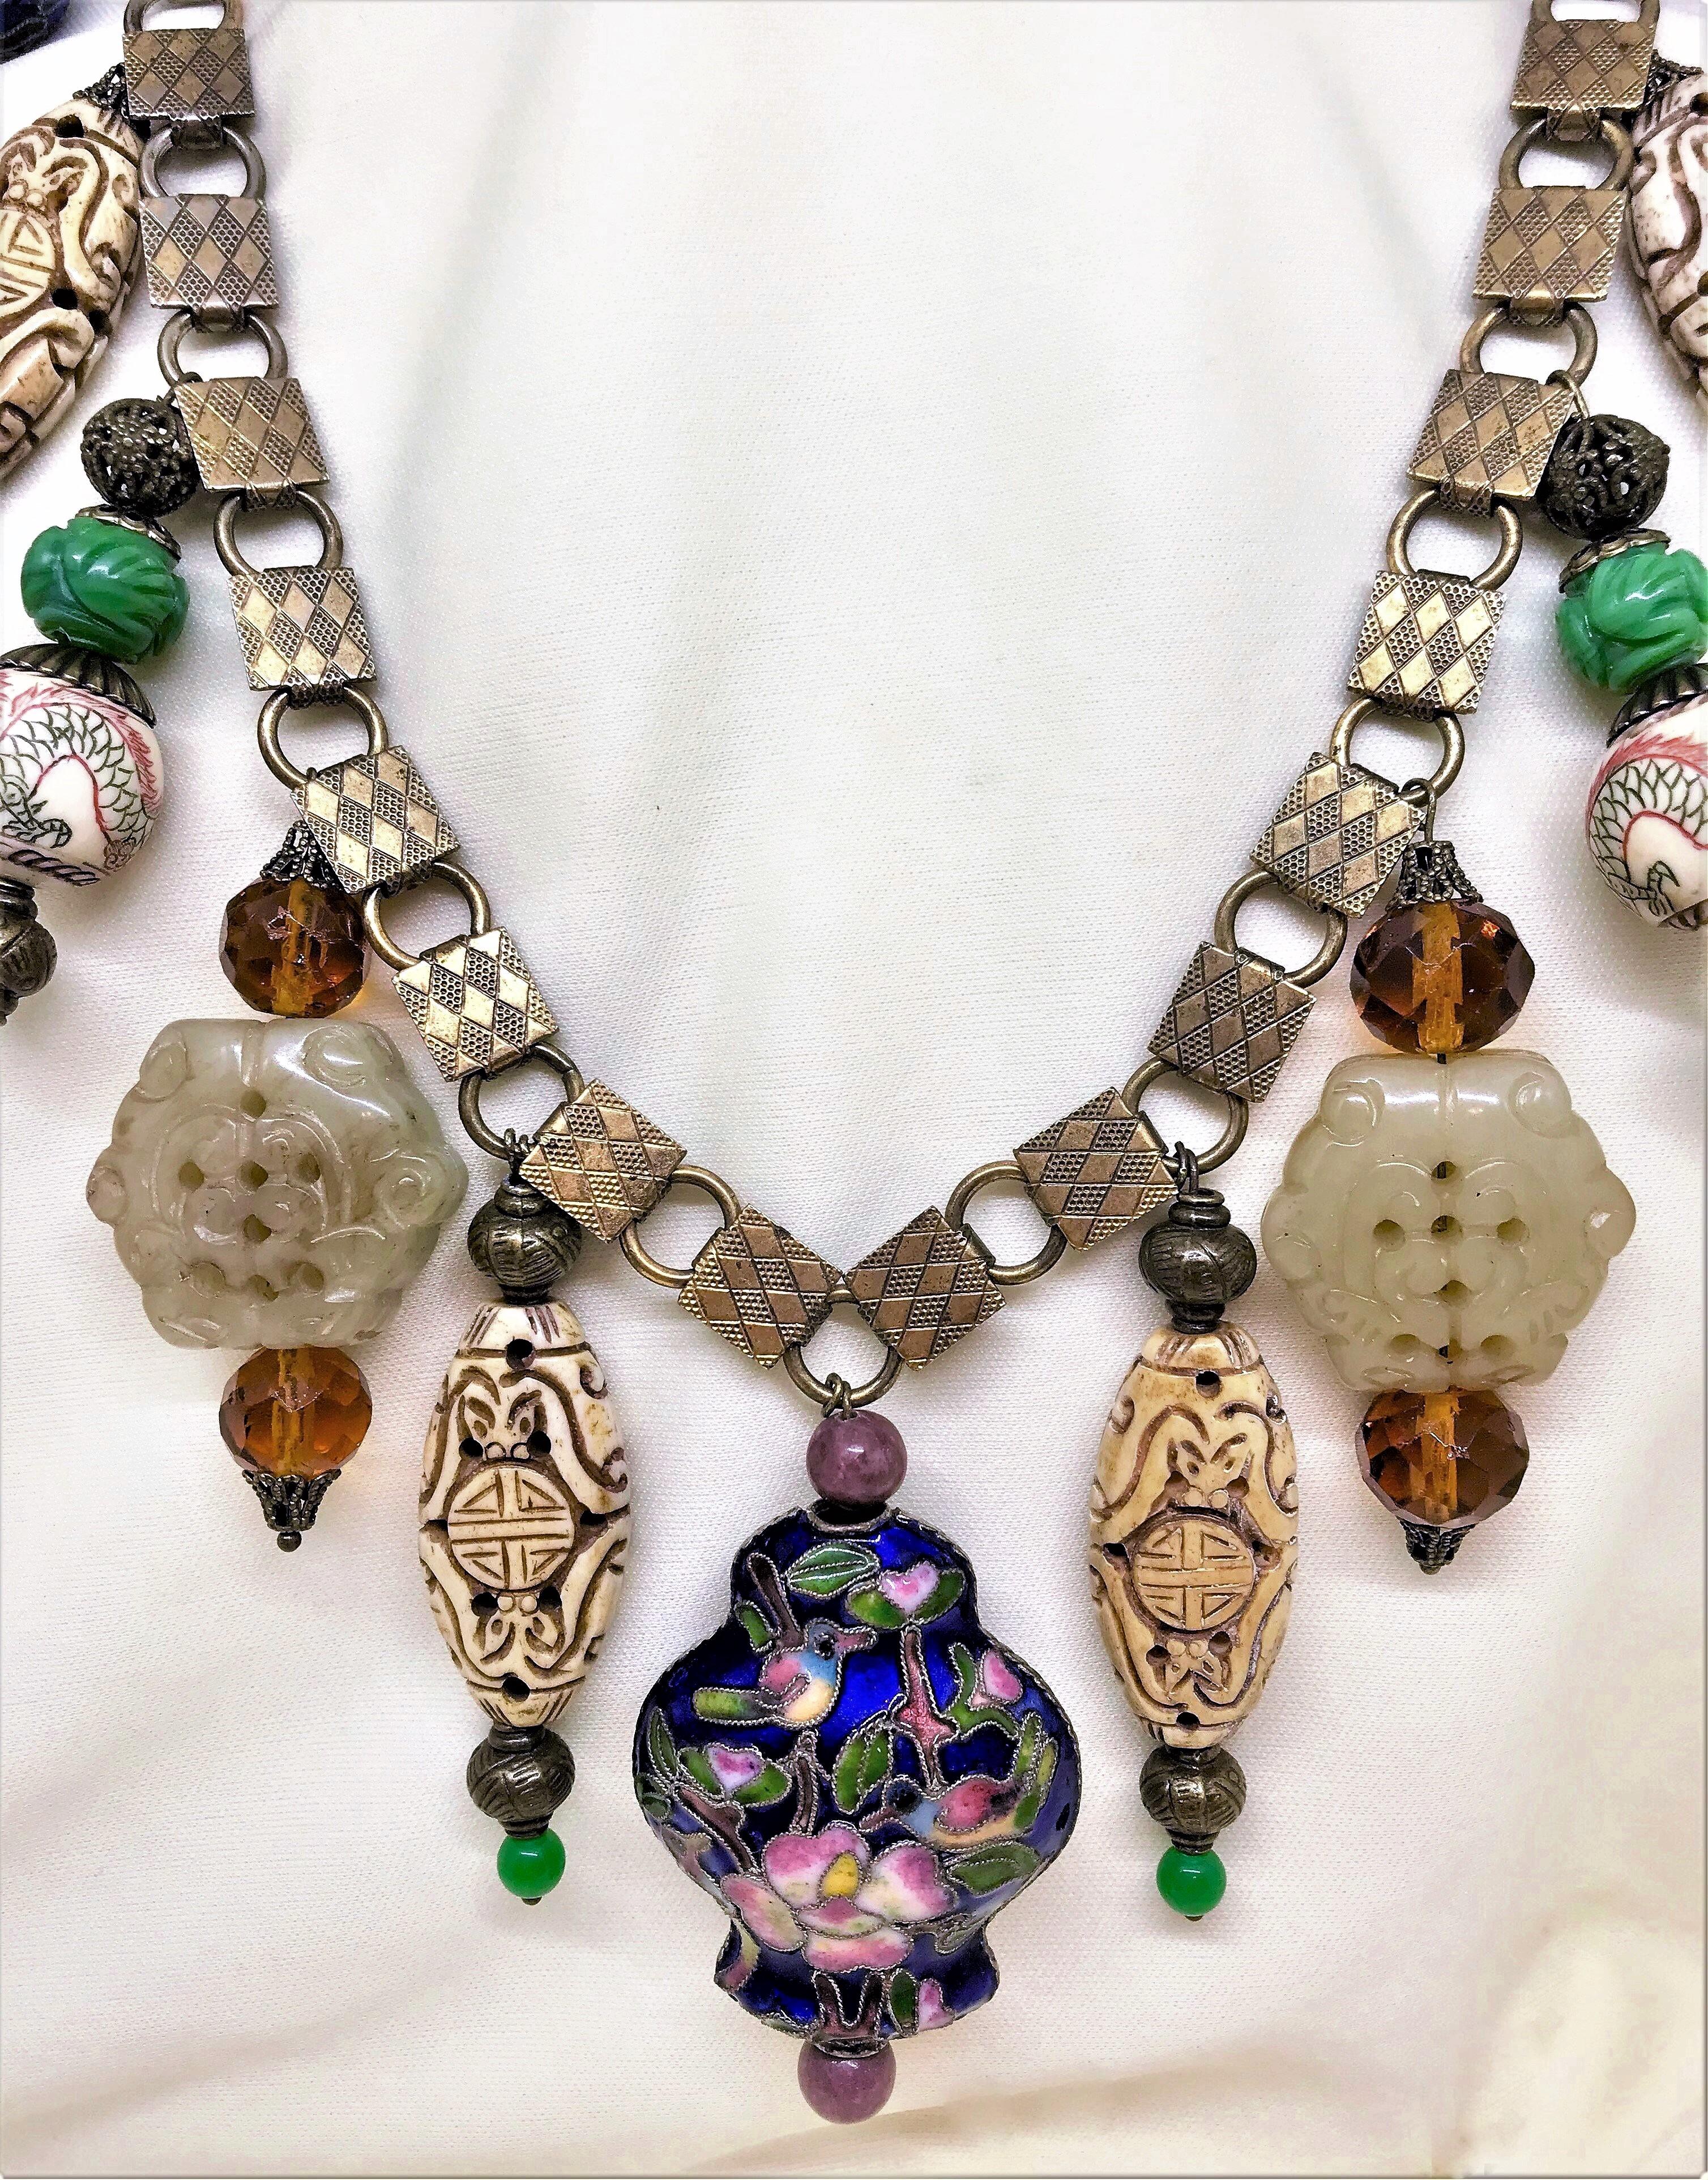 A newly created necklace from Little Treasures made from early 1900s ornate brass book-chain and a mix of contemporary and vintage Chinese beads of carved bone, porcelain dragons, cloisonné and carved Chinese Celadon beads. The necklace is